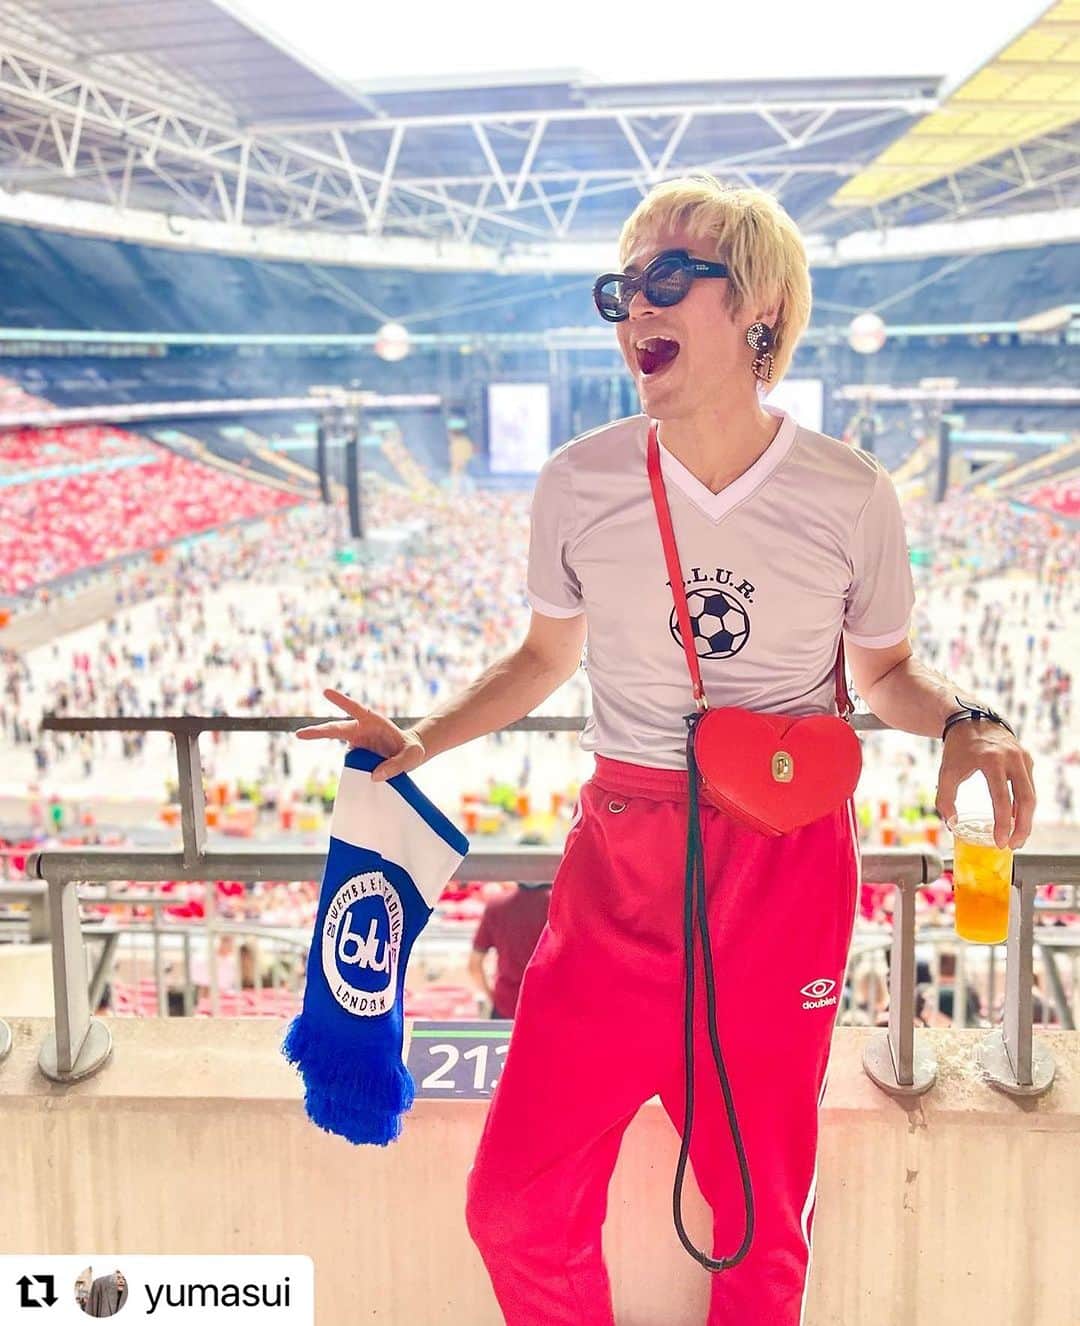 アヤメのインスタグラム：「More than happy to offer Yu @blurofficial ✨🔥🥰🇬🇧 Big wave of 90K people @wembleystadium 🔥🌊✨🇬🇧✊🏼ブラーはユウくんに行ってもらって大正解🇬🇧💙🔥✨客層over40やて😆皆んな音楽を通して自分の青春をみるんだね😌 #doublet の赤ジャージもええな🚩🎌さすが#yumasui 👏🏻👏🏻👏🏻Parklifeのコックニーも全部聞き取れるようになった自分にも拍手👏🏻😂 #90smusic #90年代 #ロンドン仲間 #ウェンブリースタジアム #ブラー   #Repost @yumasui ・・・ ☆Yu made it to the #Wembley & it was for @blurofficial concert! Yu had a chance to see live performance of his #90s favourite band from #BritPop era on Saturday. #ThankYou to @ayame_socks for offering Yu tickets! 🙏😘🙏  2. Never been #wemblystadium for concerts before! 3. Found younger fan in teen magazine cute tees! Actually main audiences are 40over & their teen or early 20s kids. 4. Started with shipping of course! Yu had to get this Wembley only #football shirt in very 90s silver (the one wearing in pic 1)! Actually it matched with outfit too as if it was planned. 5. 1 of opening acts.. 🤣 6. It was boys’ night out with wife & kids free dad @aalexszalai ! Thanx for being a companion ✌️ 7. Actor #PhilDaniels the original cockney narration from #Parklife joined the song!!! 8. #Song2 ! 9. Thank you for wonderful time!!! 10. Super happy.. ⚽️⚽️⚽️⚽️⚽️⚽️⚽️⚽️⚽️⚽️⚽️⚽️ #whatyuiswearing  #whatyuiseating  #london #concert」